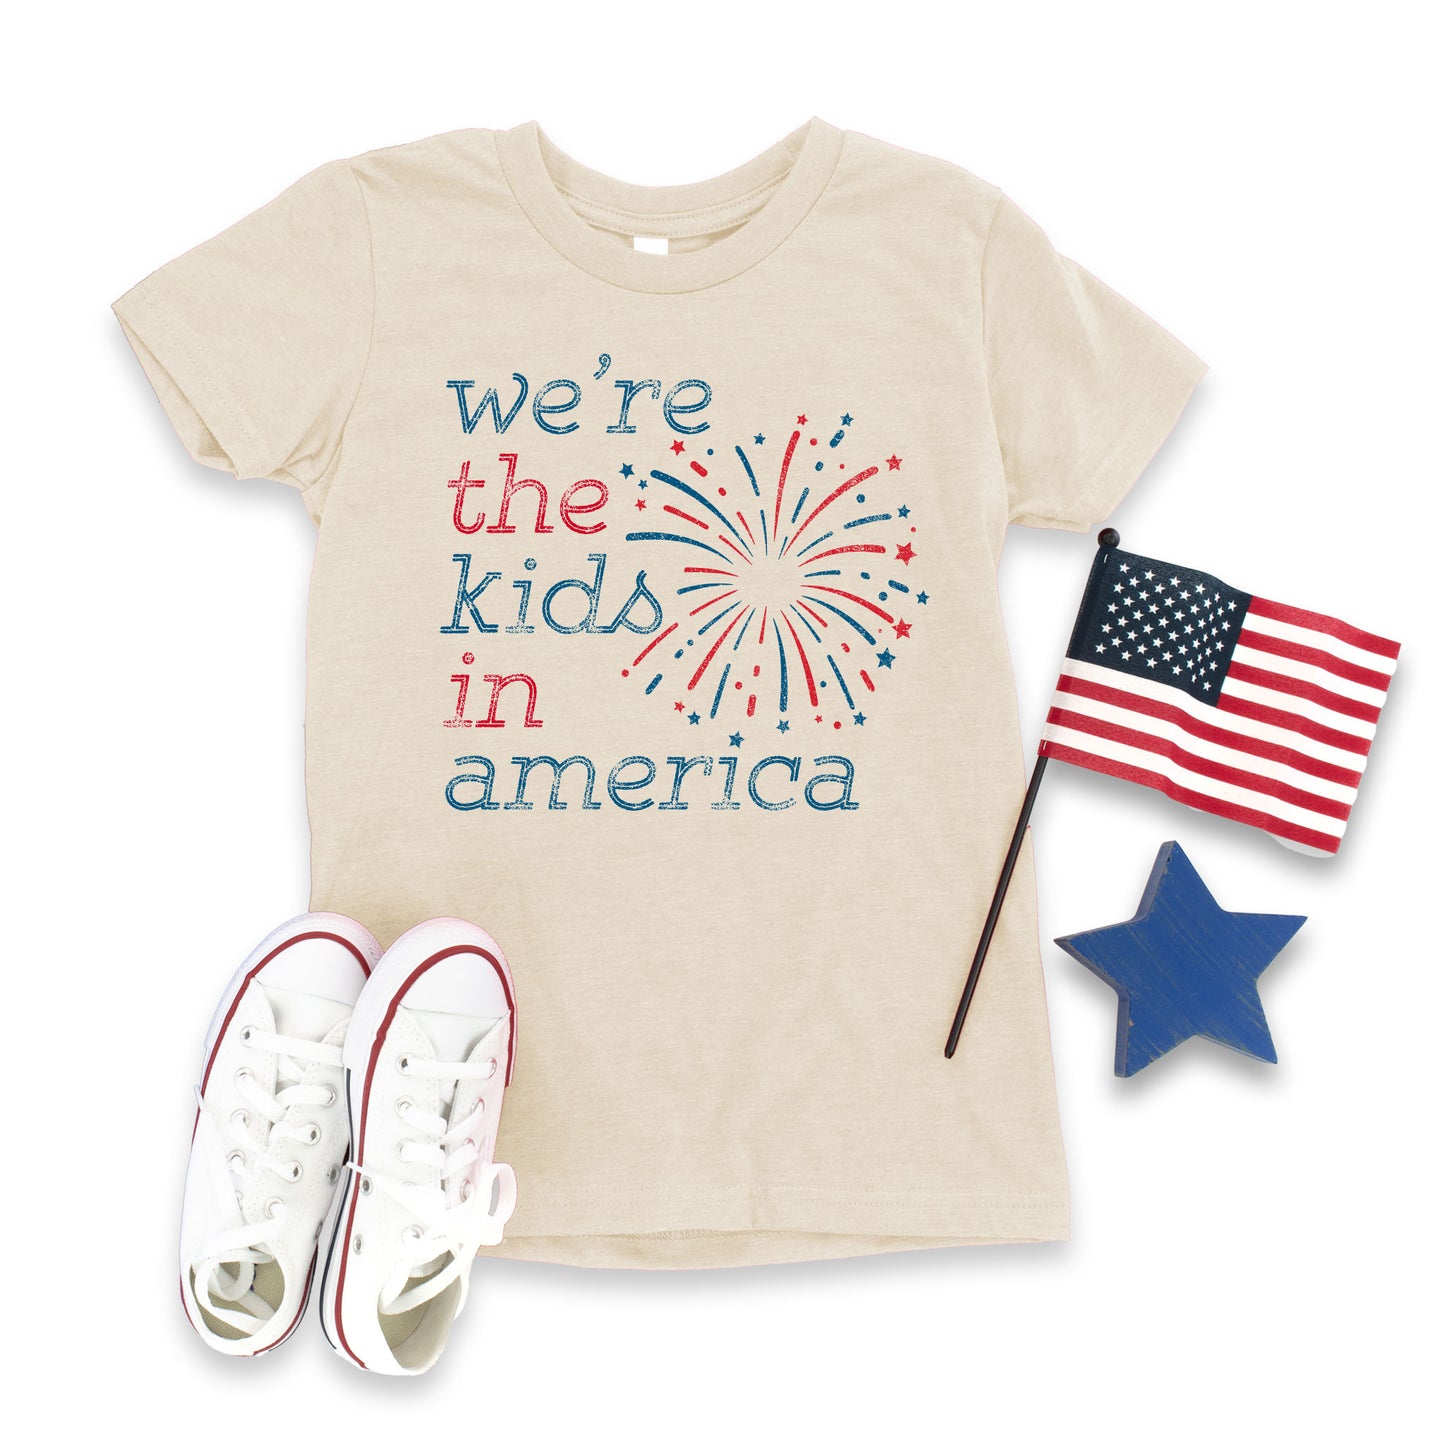 "We're the Kids in America" - Sand T-shirt (Youth Only)